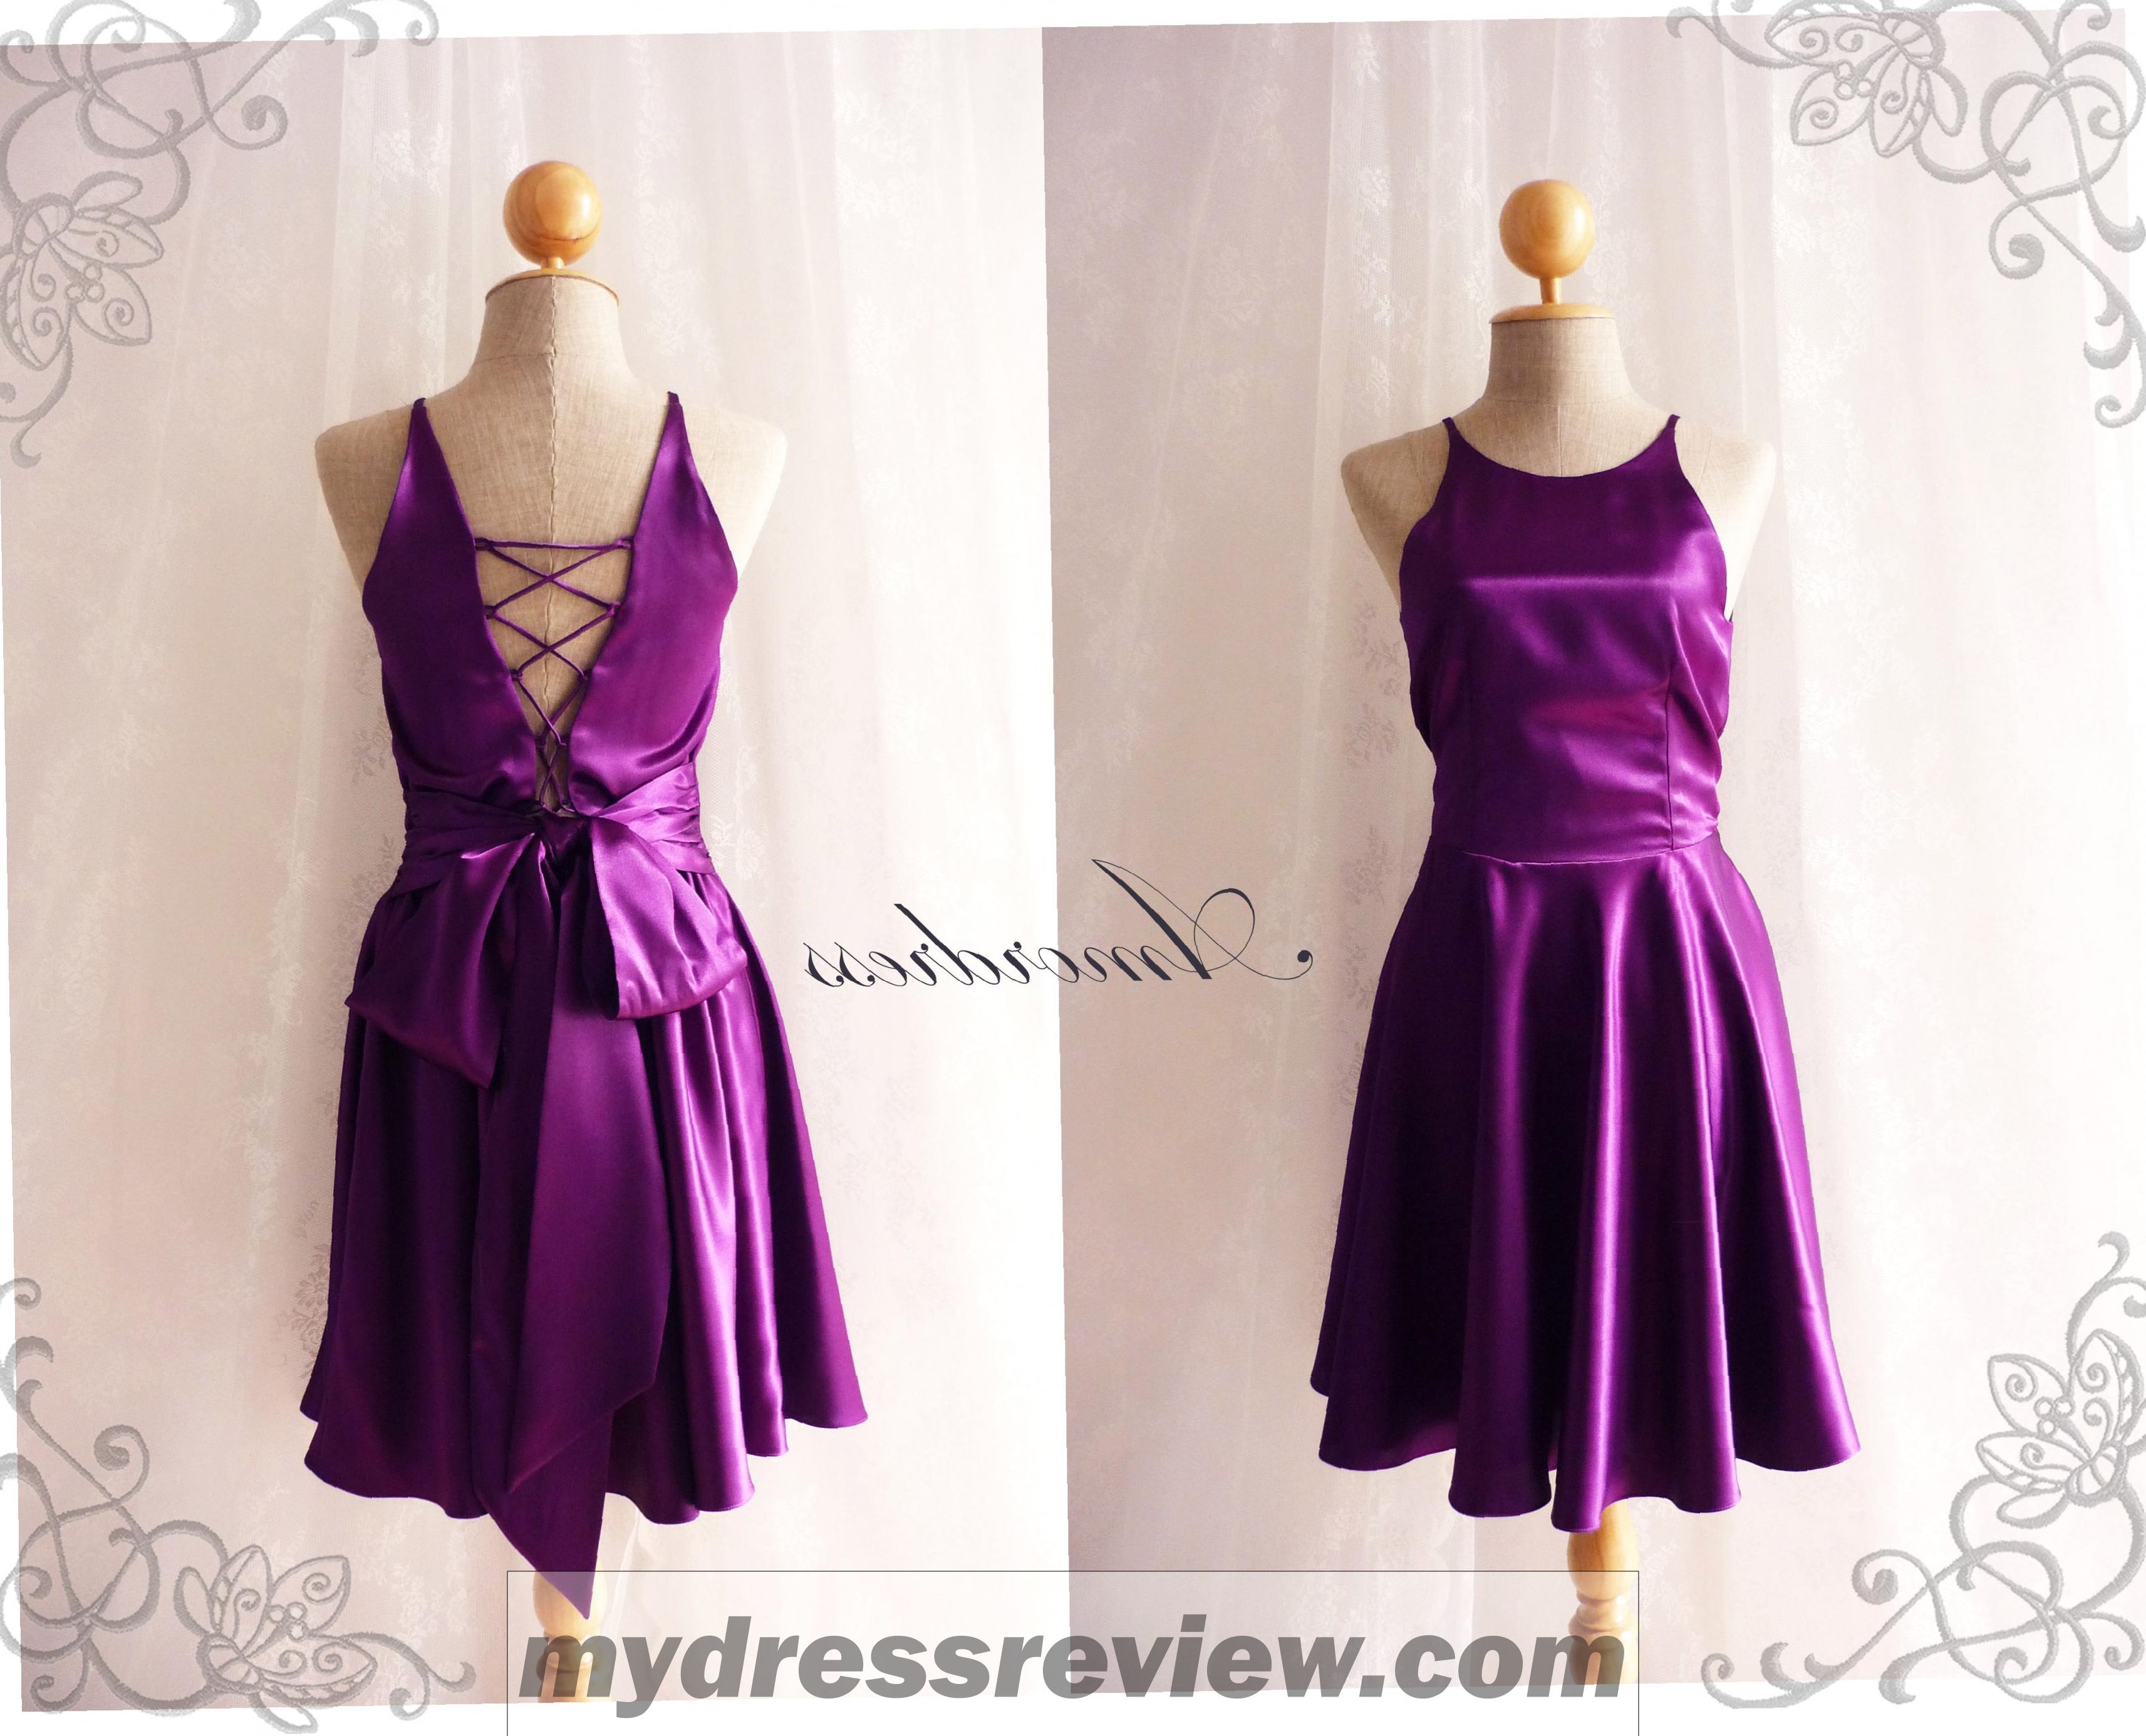 Backless Purple Dress And New Fashion Collection